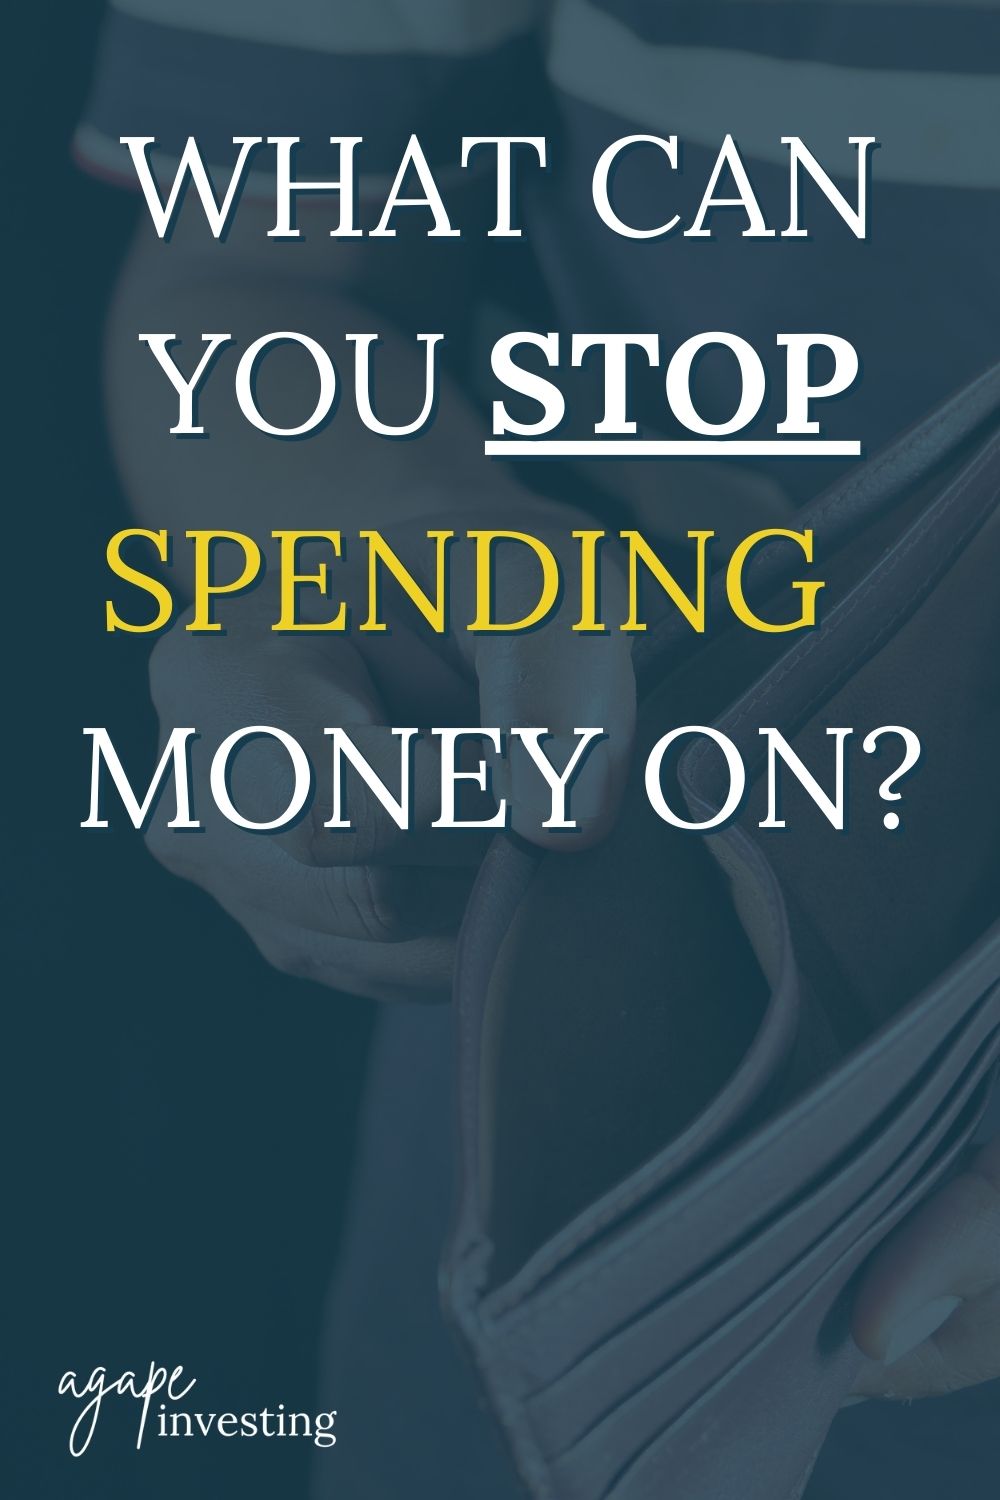 Many times, after working 1:1 with a client, I have found that they are paying for things that are honestly just not necessary. So I want to share with you 10 things that you need to stop paying for based on things I have seen my clients pay for 